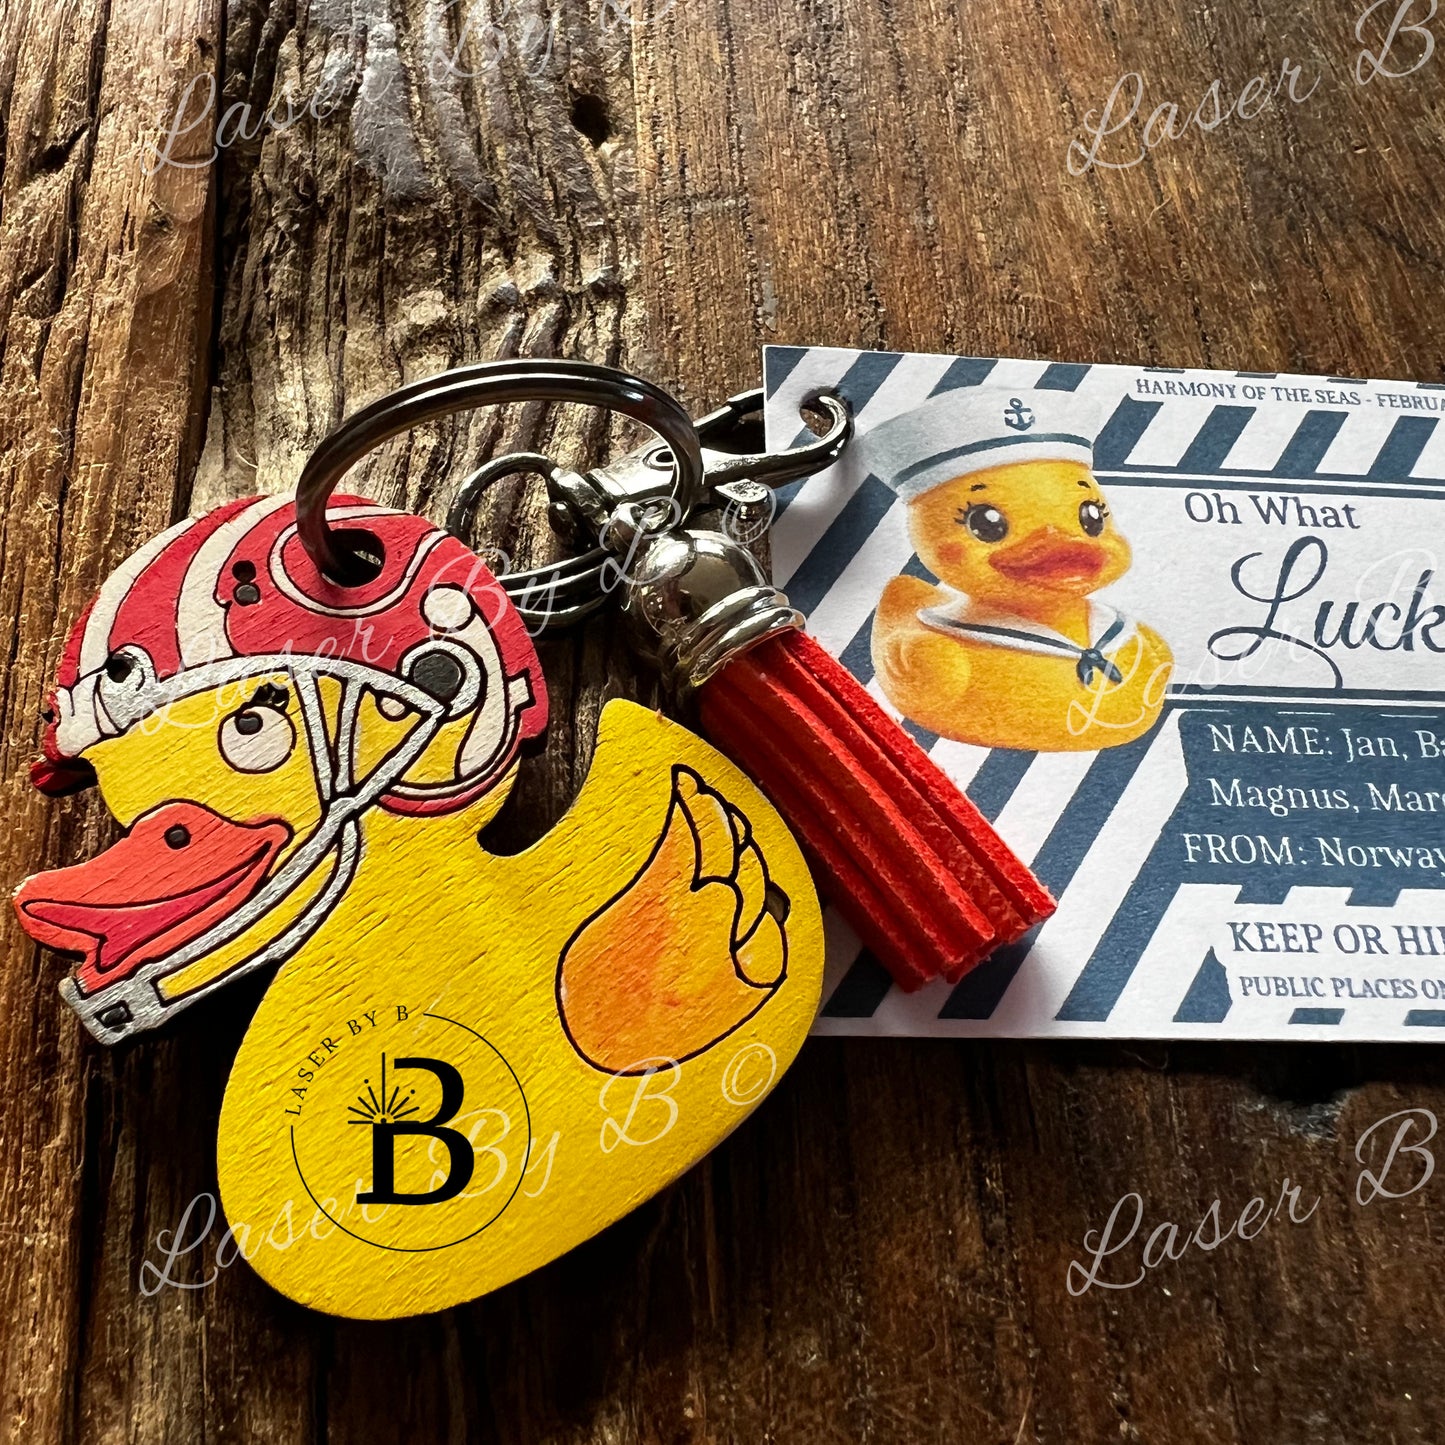 Duck Key Chain Laser File perfect for a Cruising Duck Hunt - Includes Customizable Tag